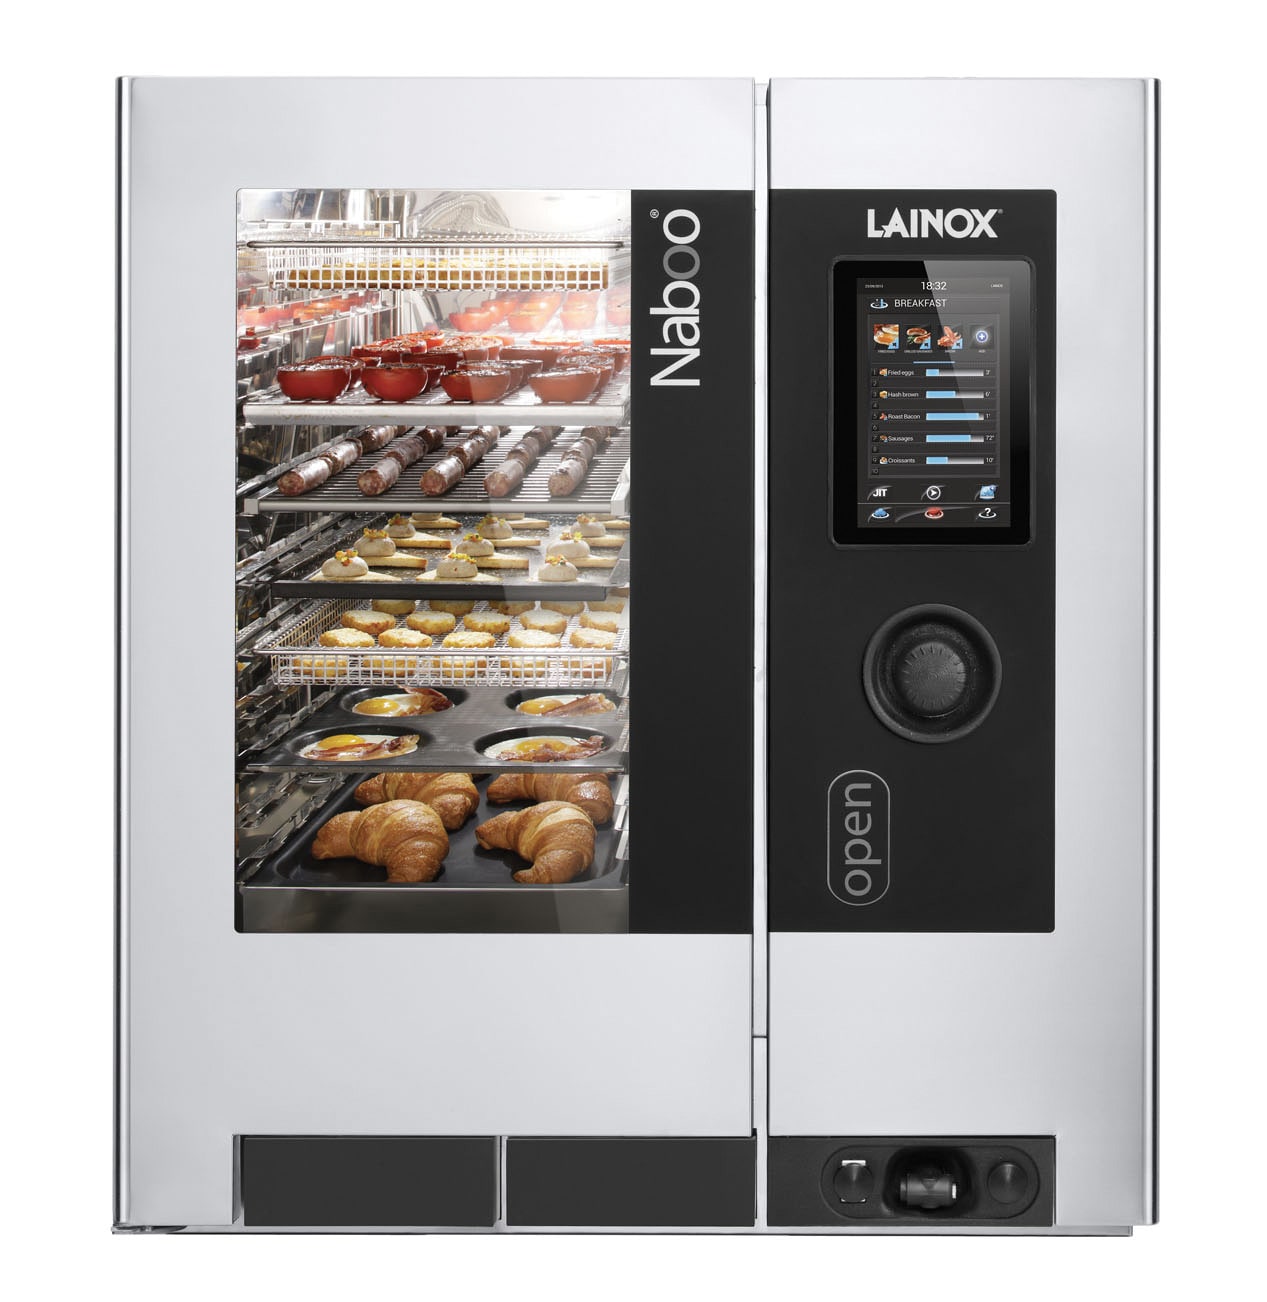 Lainox-combination-ovens-are-available-from-Falcon